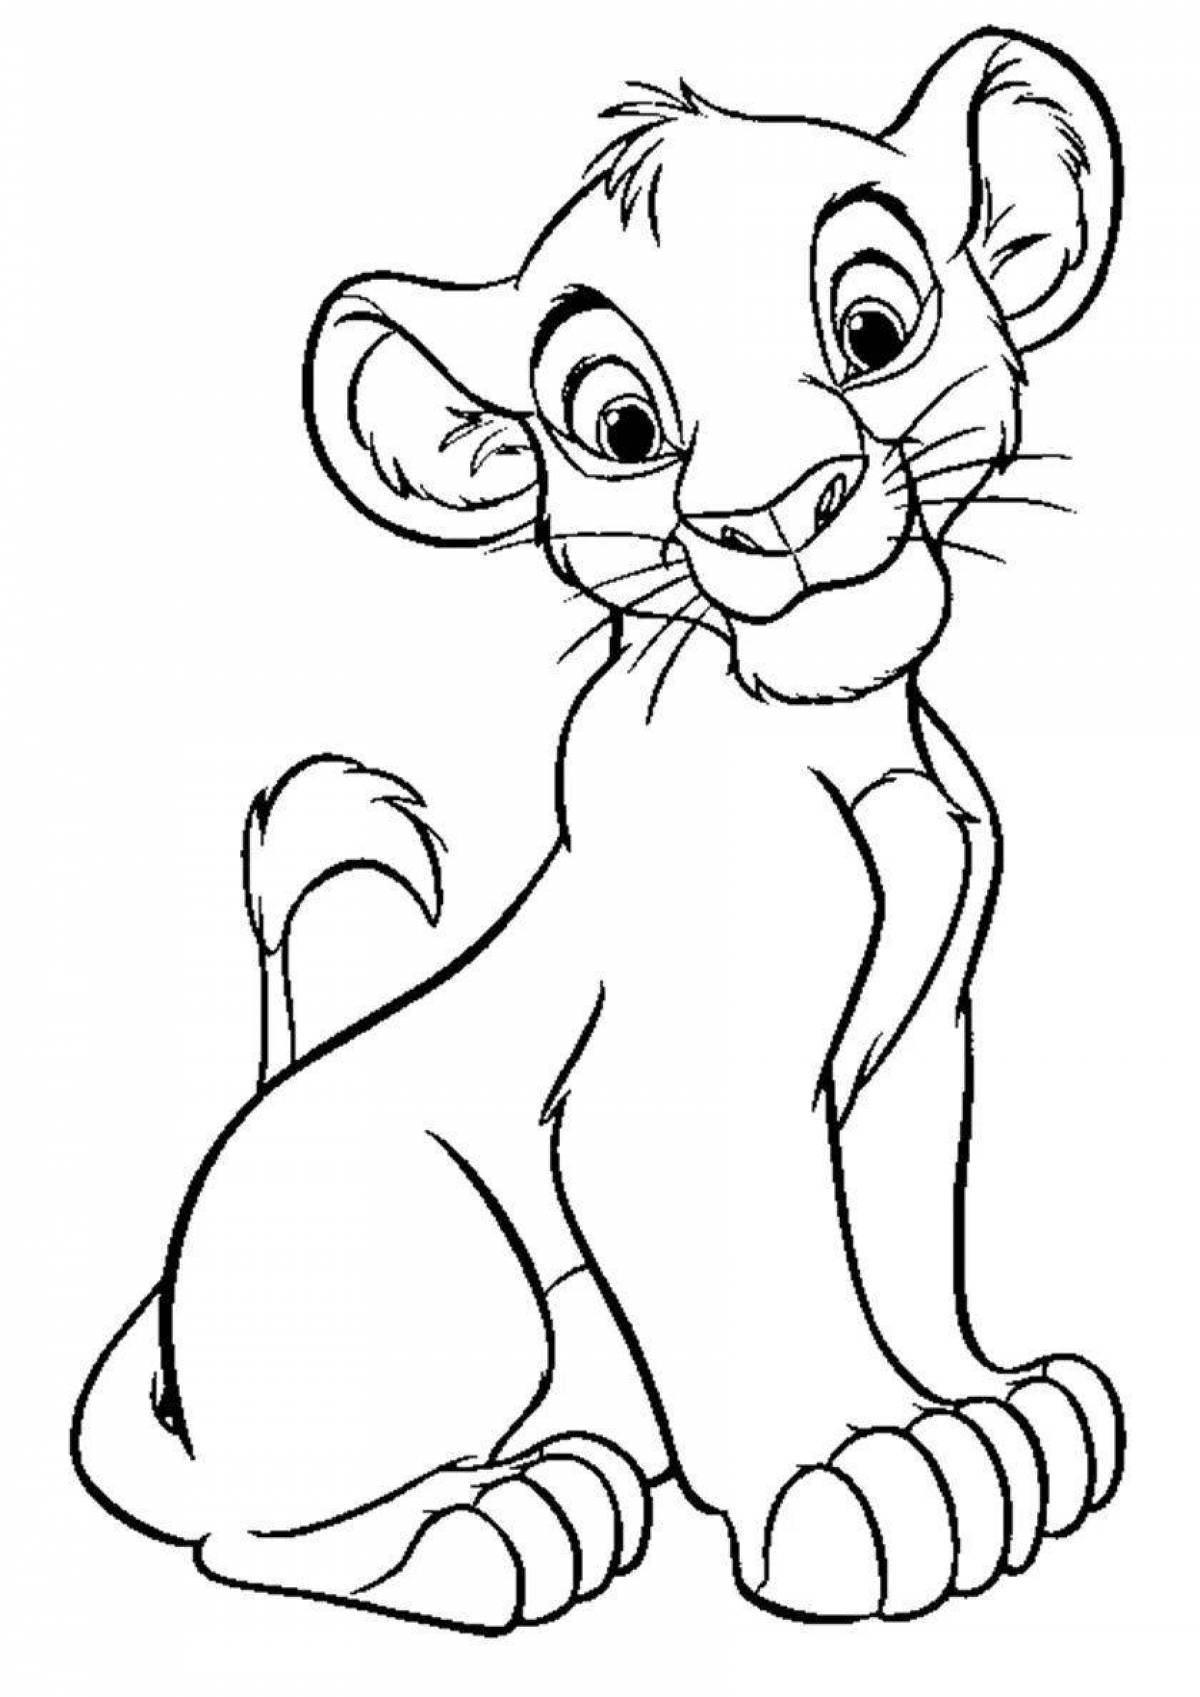 Gorgeous simba coloring page